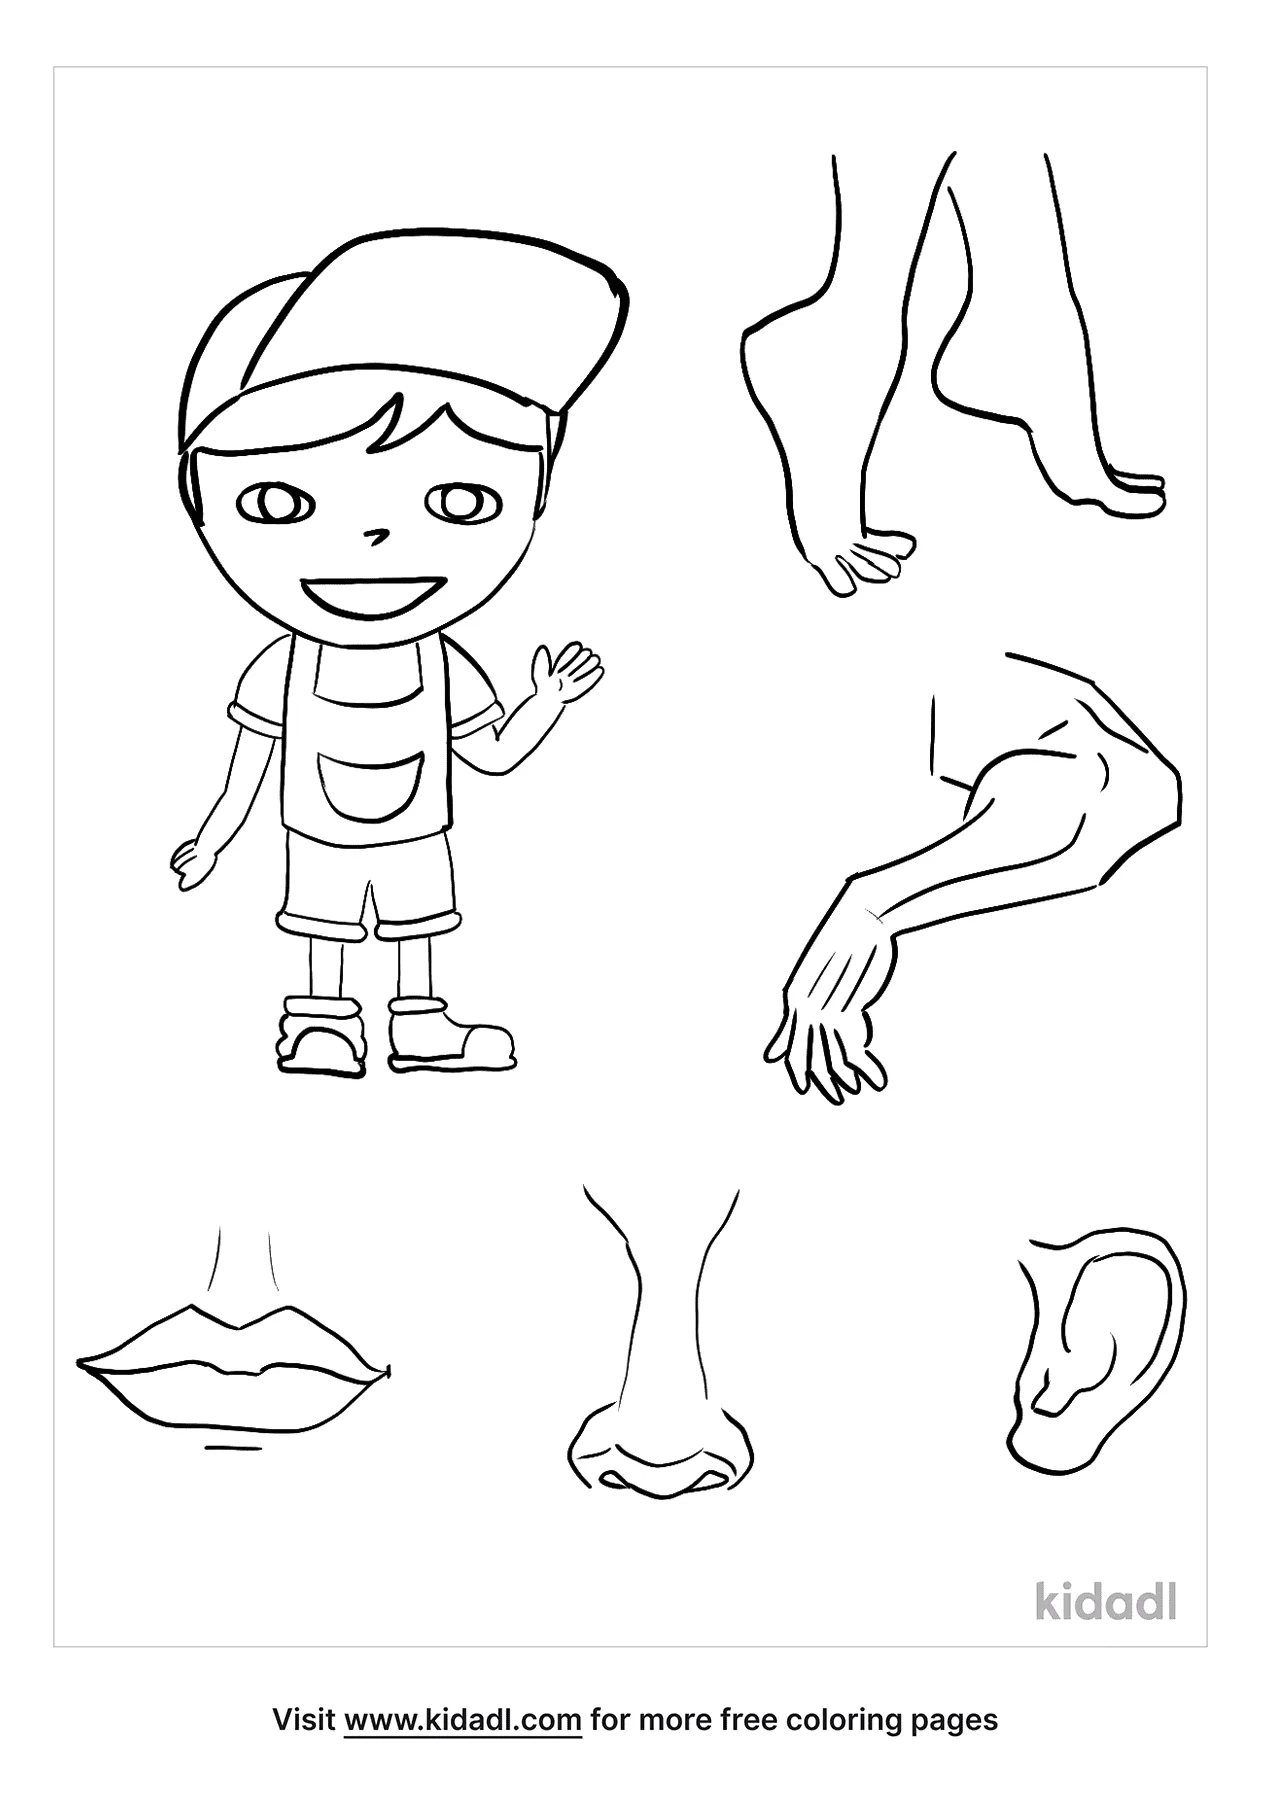 Body Parts for Kids раскраска